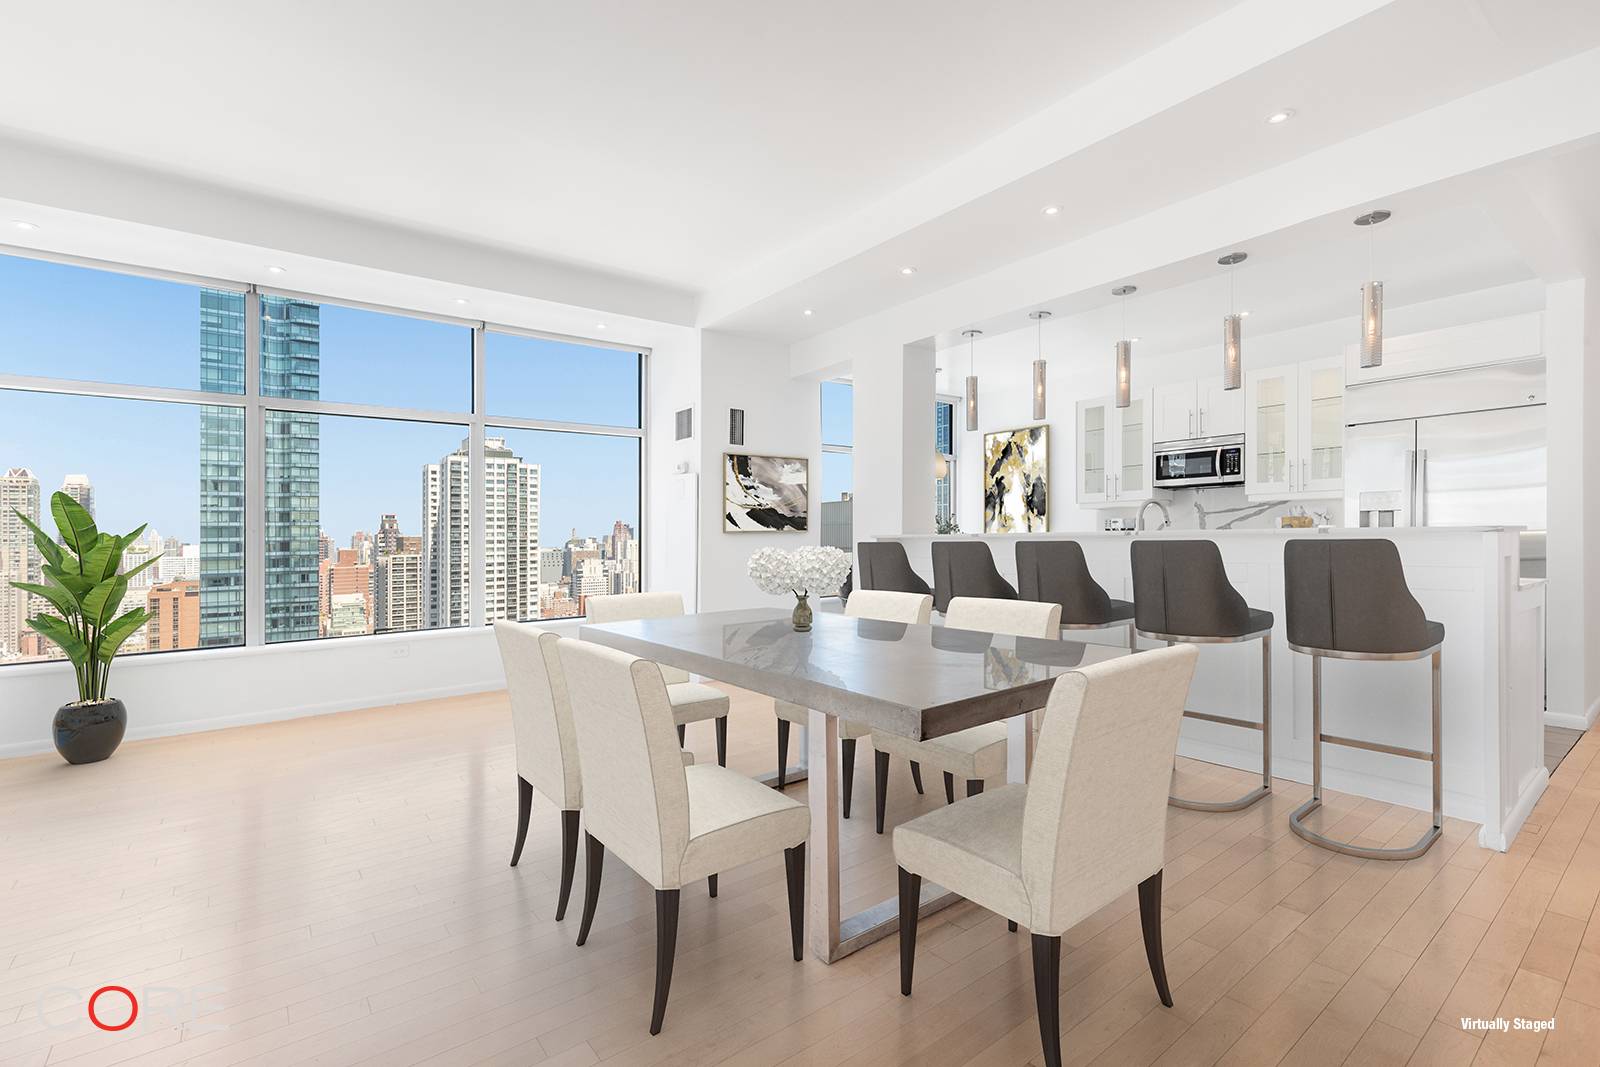 A full floor penthouse with over 3, 000 square feet of private outdoor space and breathtaking views of the city.